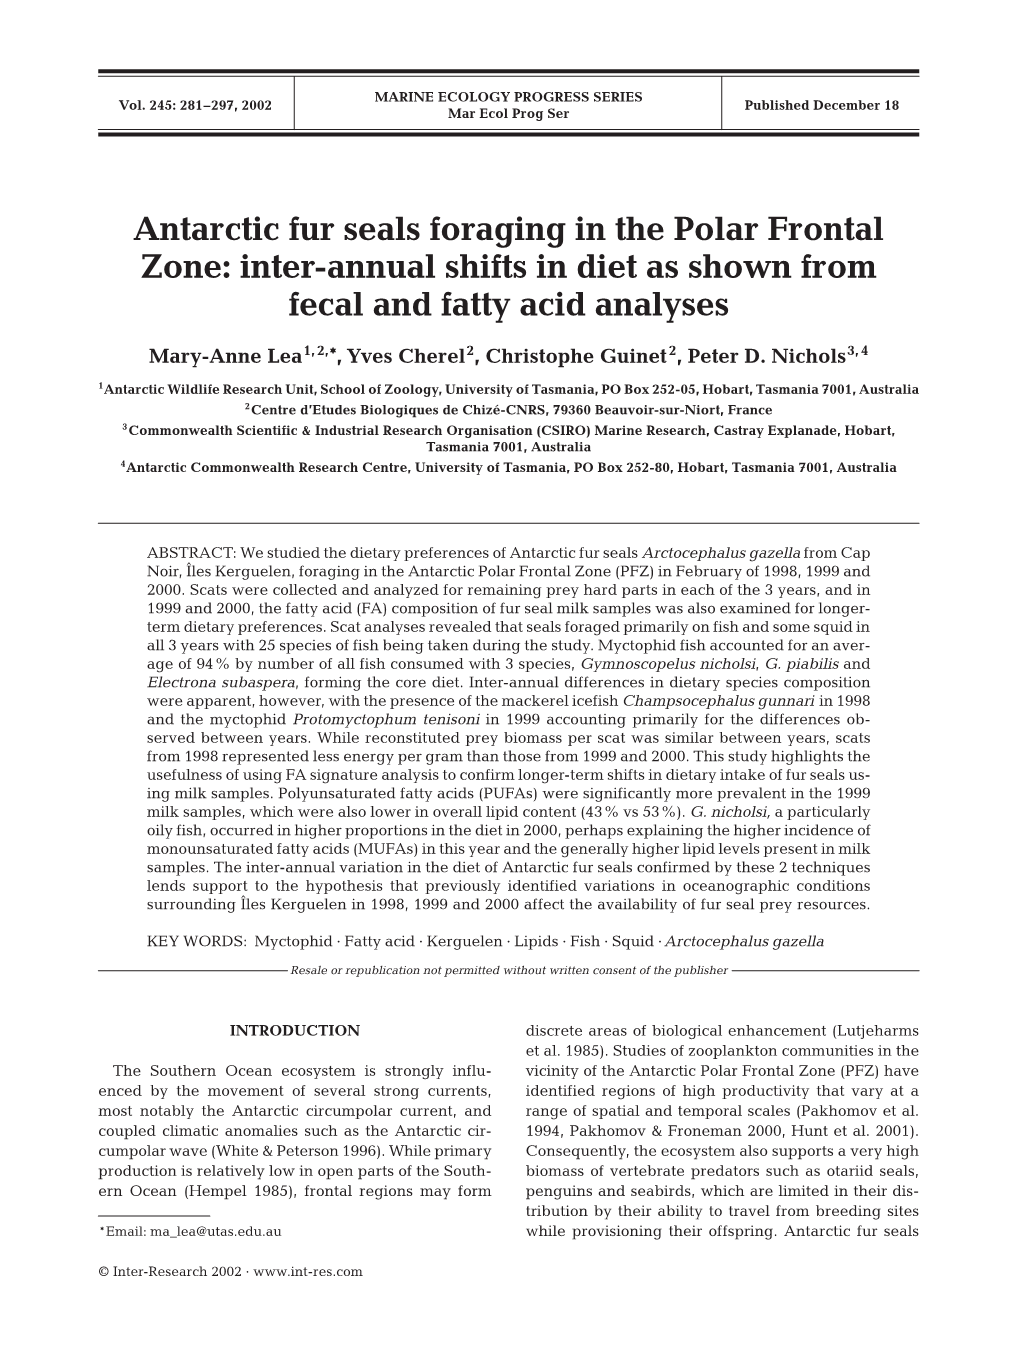 Antarctic Fur Seals Foraging in the Polar Frontal Zone: Inter-Annual Shifts in Diet As Shown from Fecal and Fatty Acid Analyses